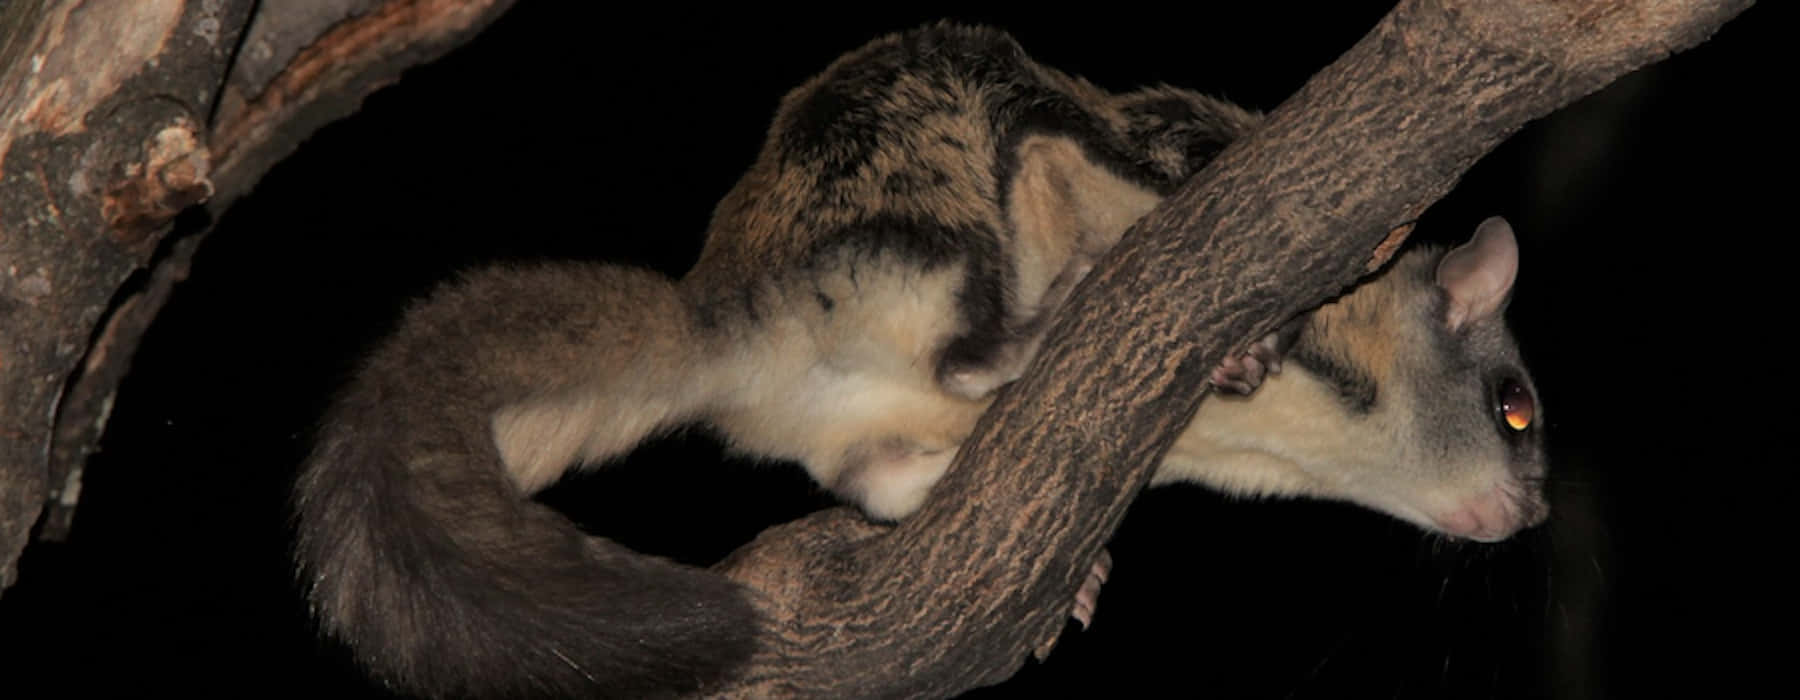 Image  Creativity Soaring High: Flying Squirrel Catching a Ride